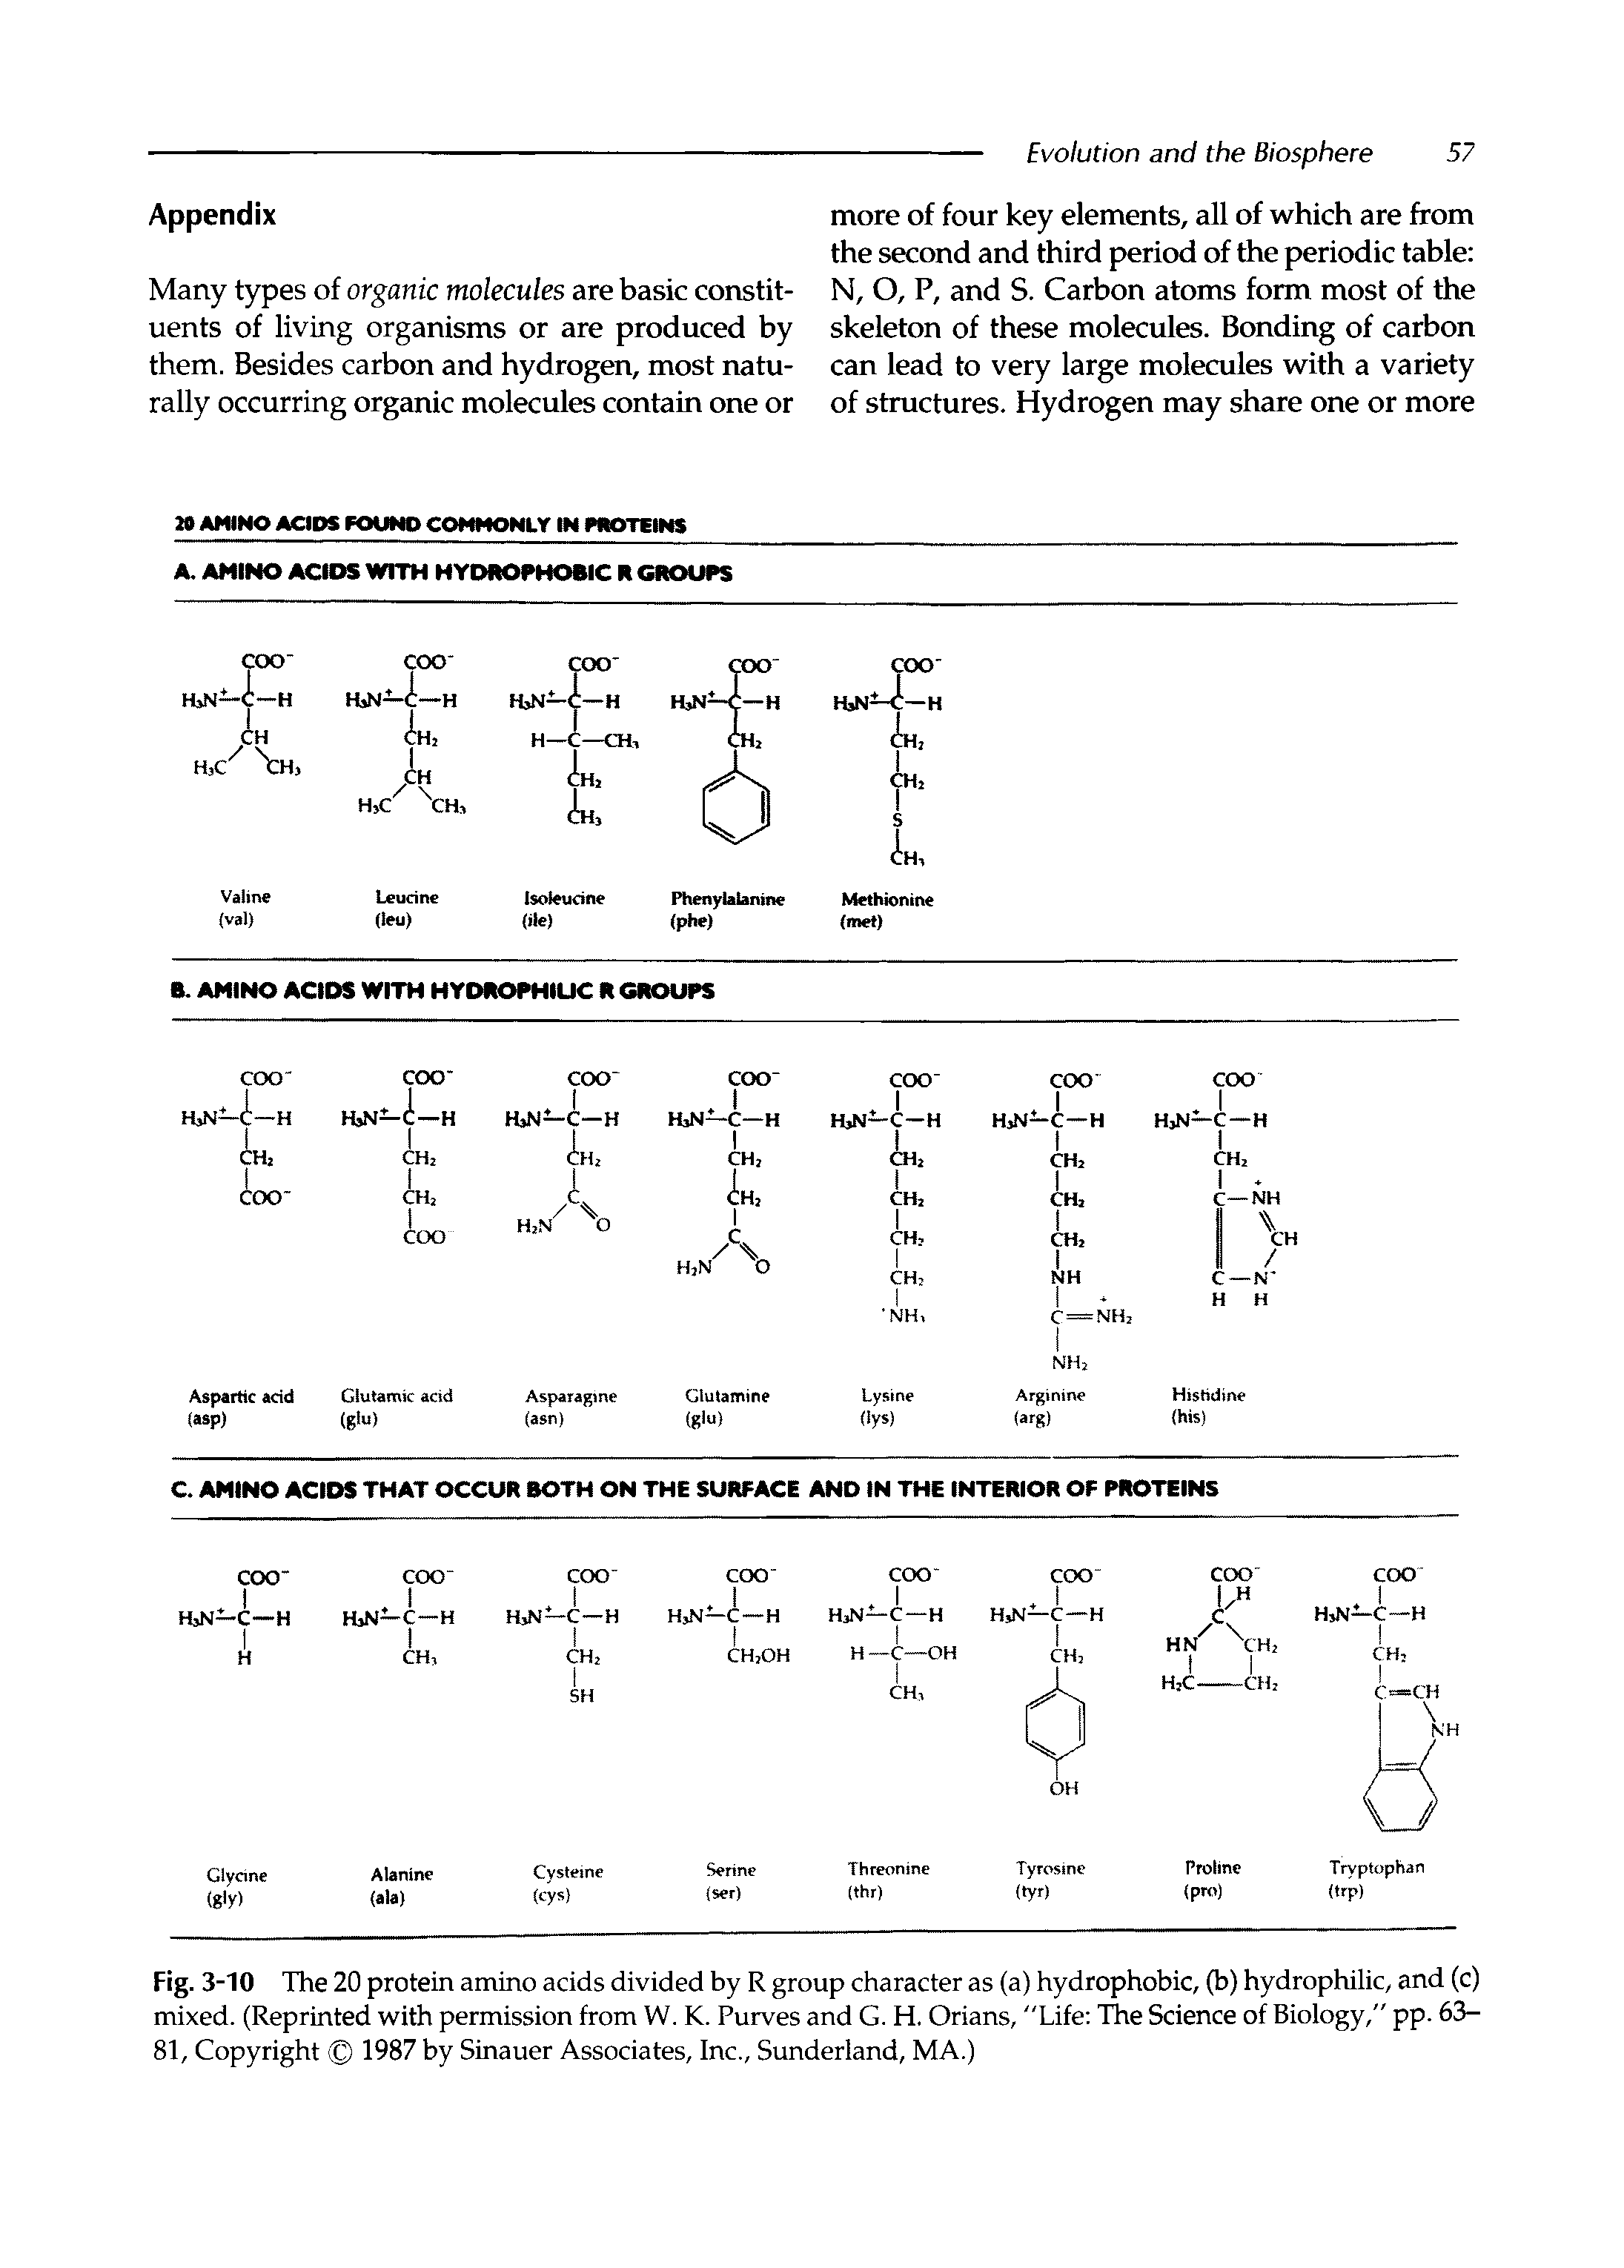 Fig. 3-10 The 20 protein amino acids divided by R group character as (a) hydrophobic, (b) hydrophilic, and (c) mixed. (Reprinted with permission from W. K. Purves and G. H. Orians, Life The Science of Biology," pp. 63-81, Copyright 1987 by Sinauer Associates, Inc., Sunderland, MA.)...